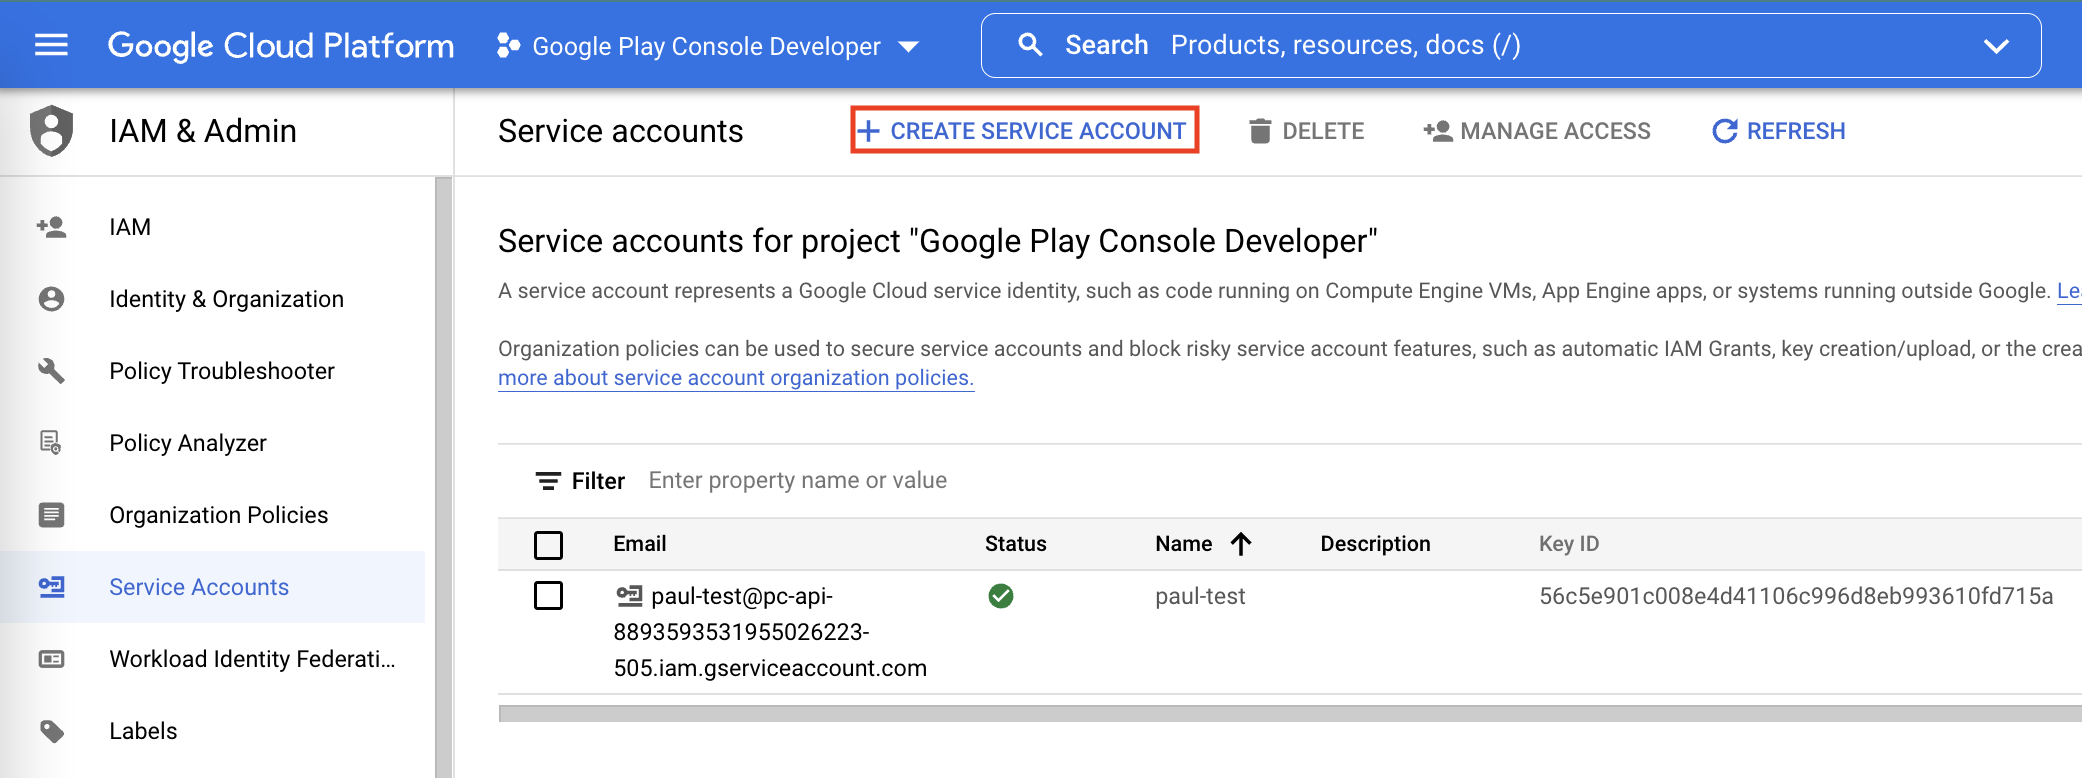 /img/appflow/gcp-create-service-account.png